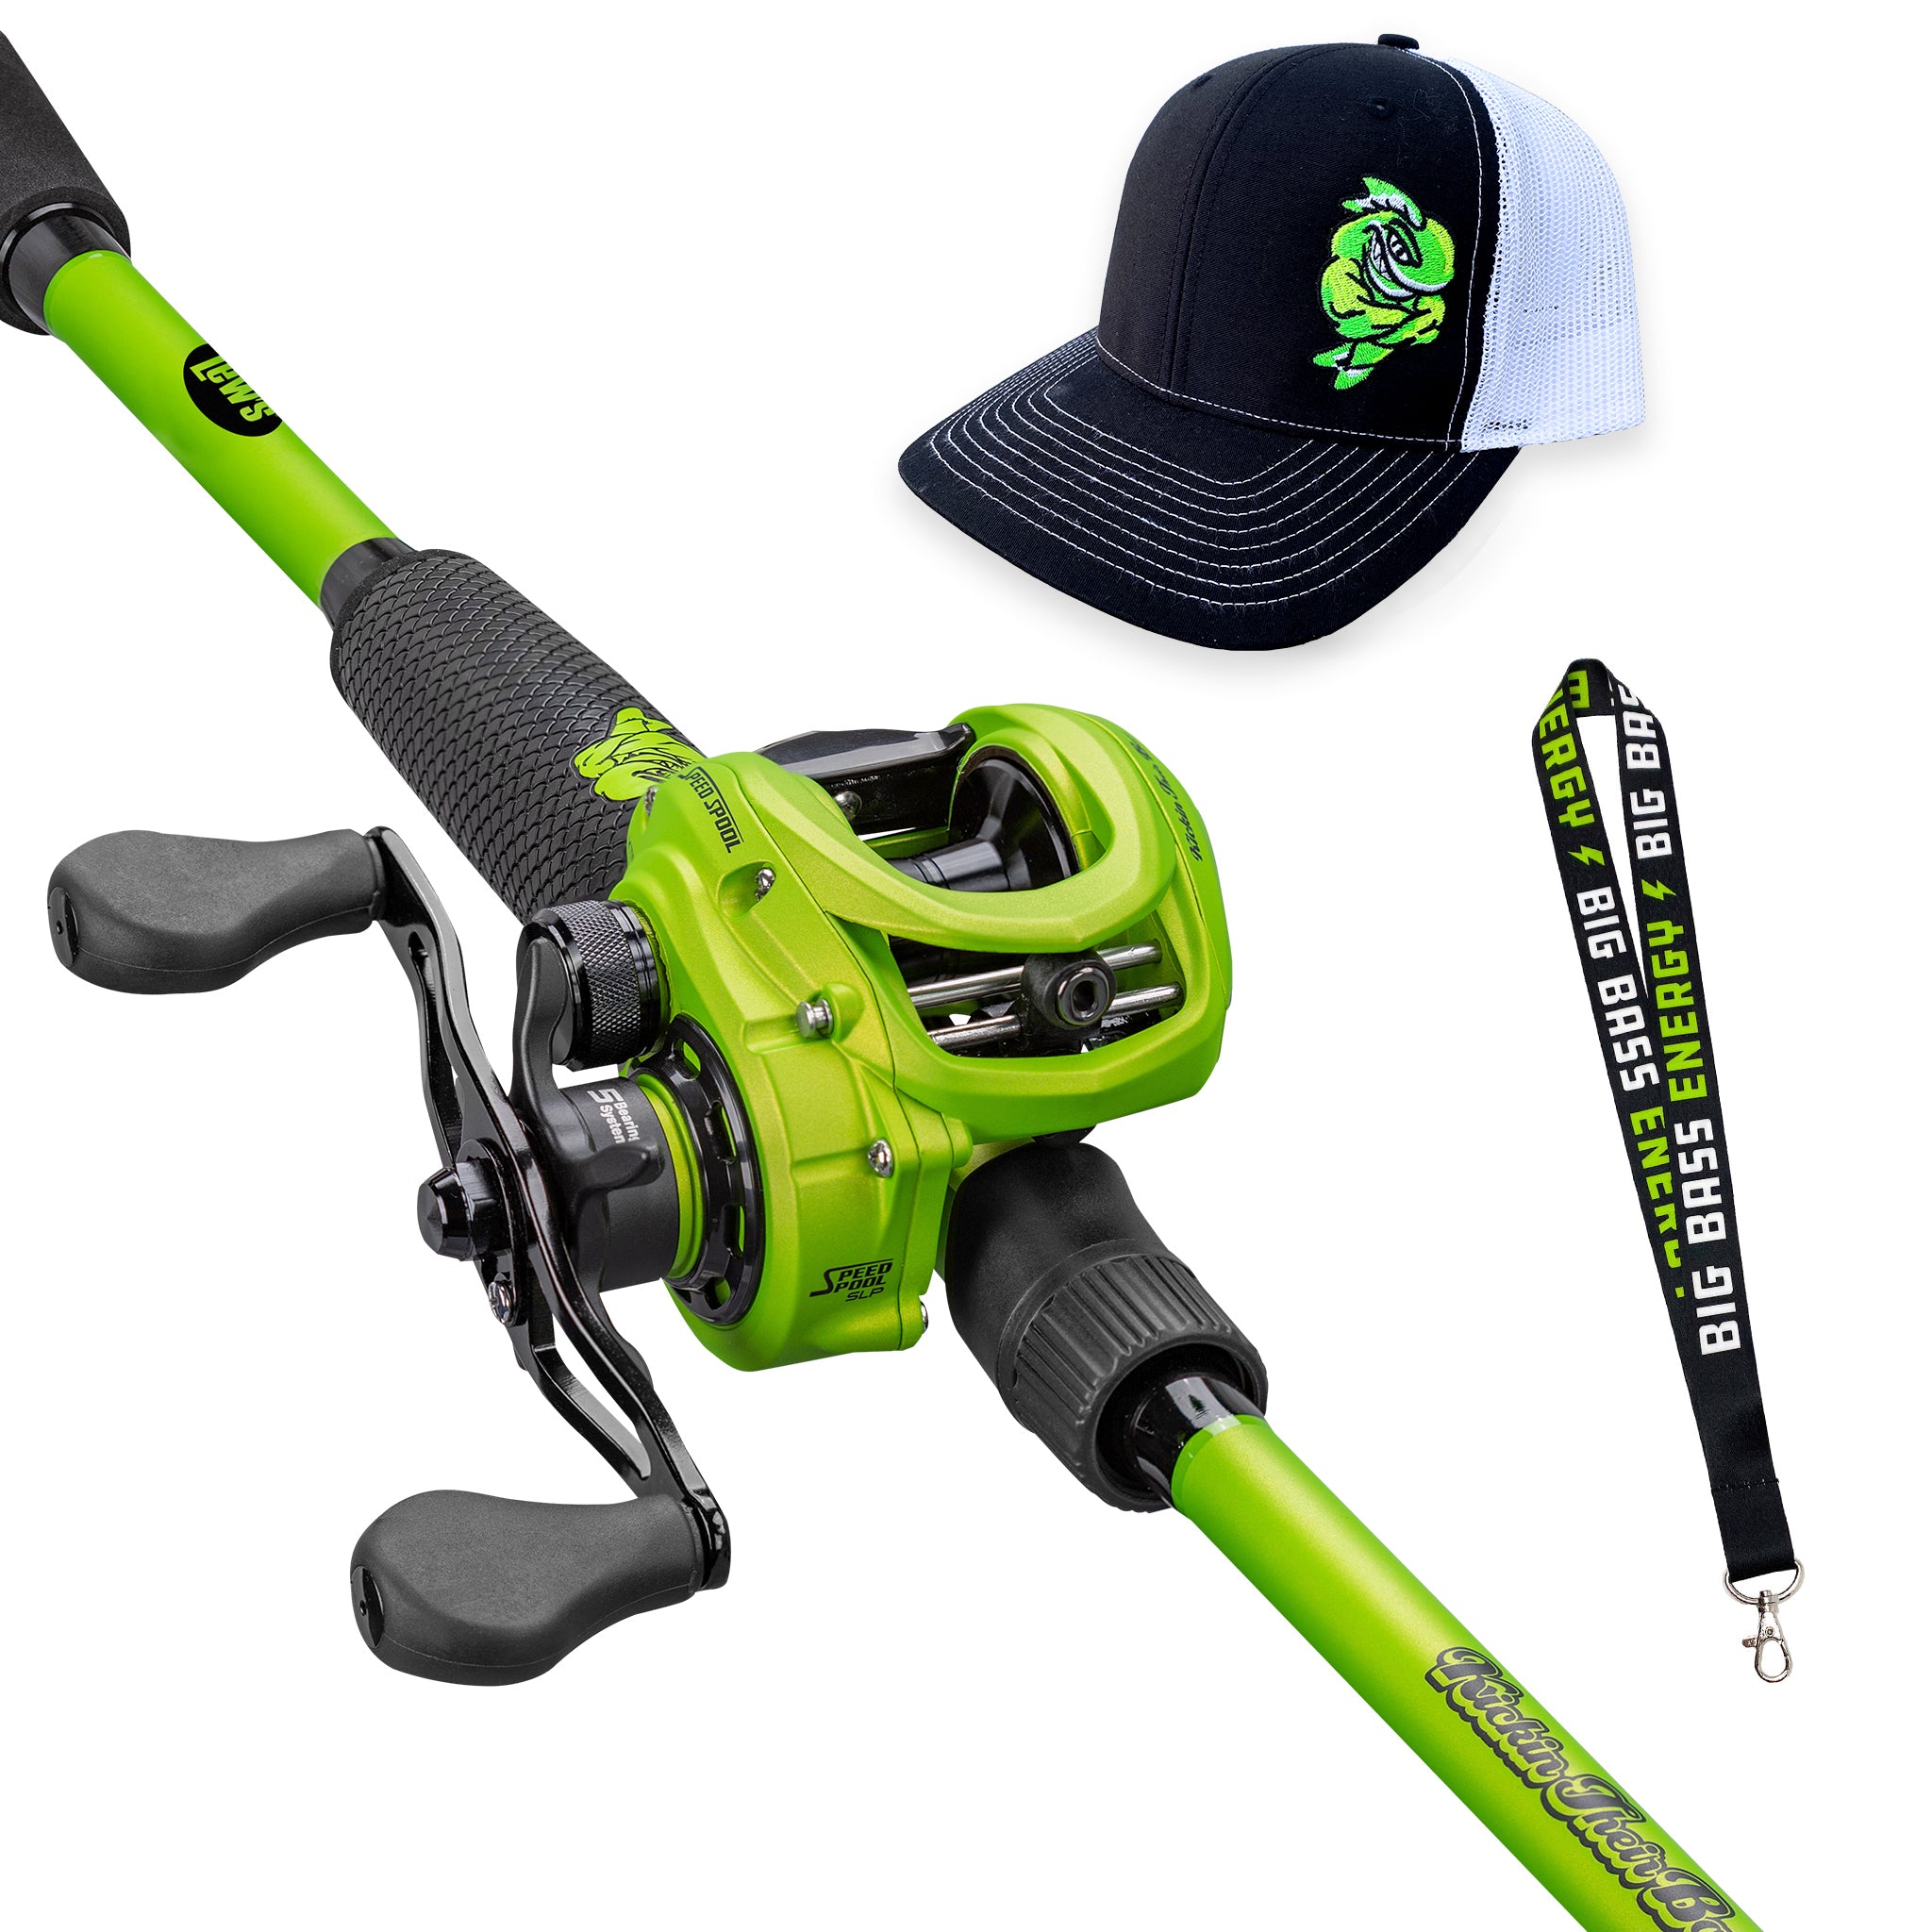 Kickin' Their Bass x Lew's Baitcast Combo Package (RIGHT)